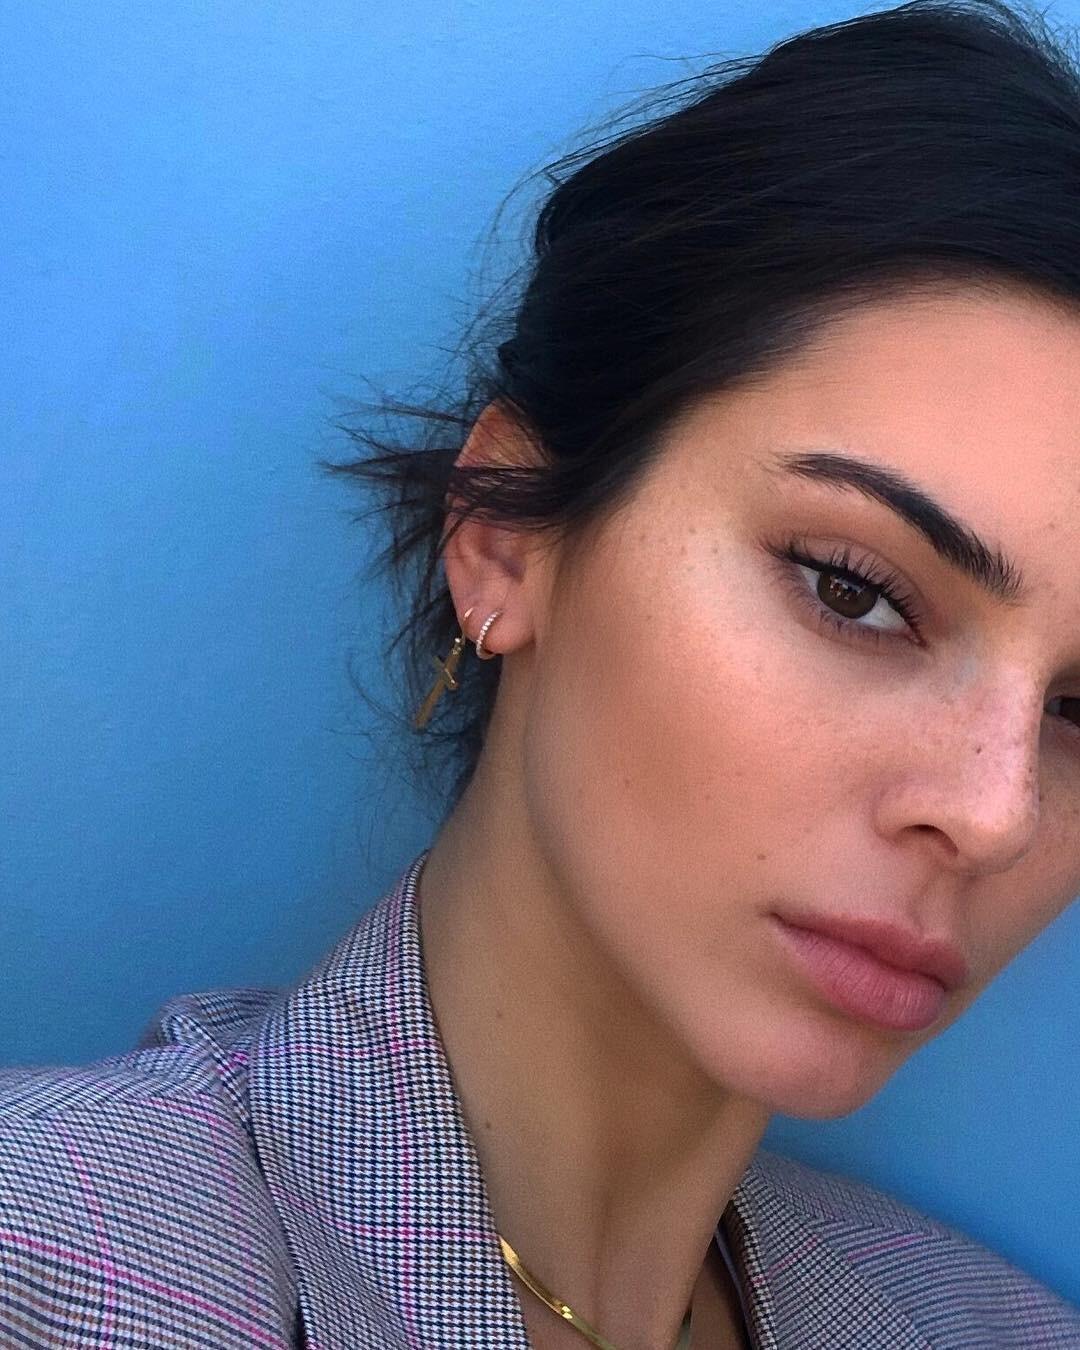 How to make up like Kendall Jenner: a routine for natural -looking makeup lovers